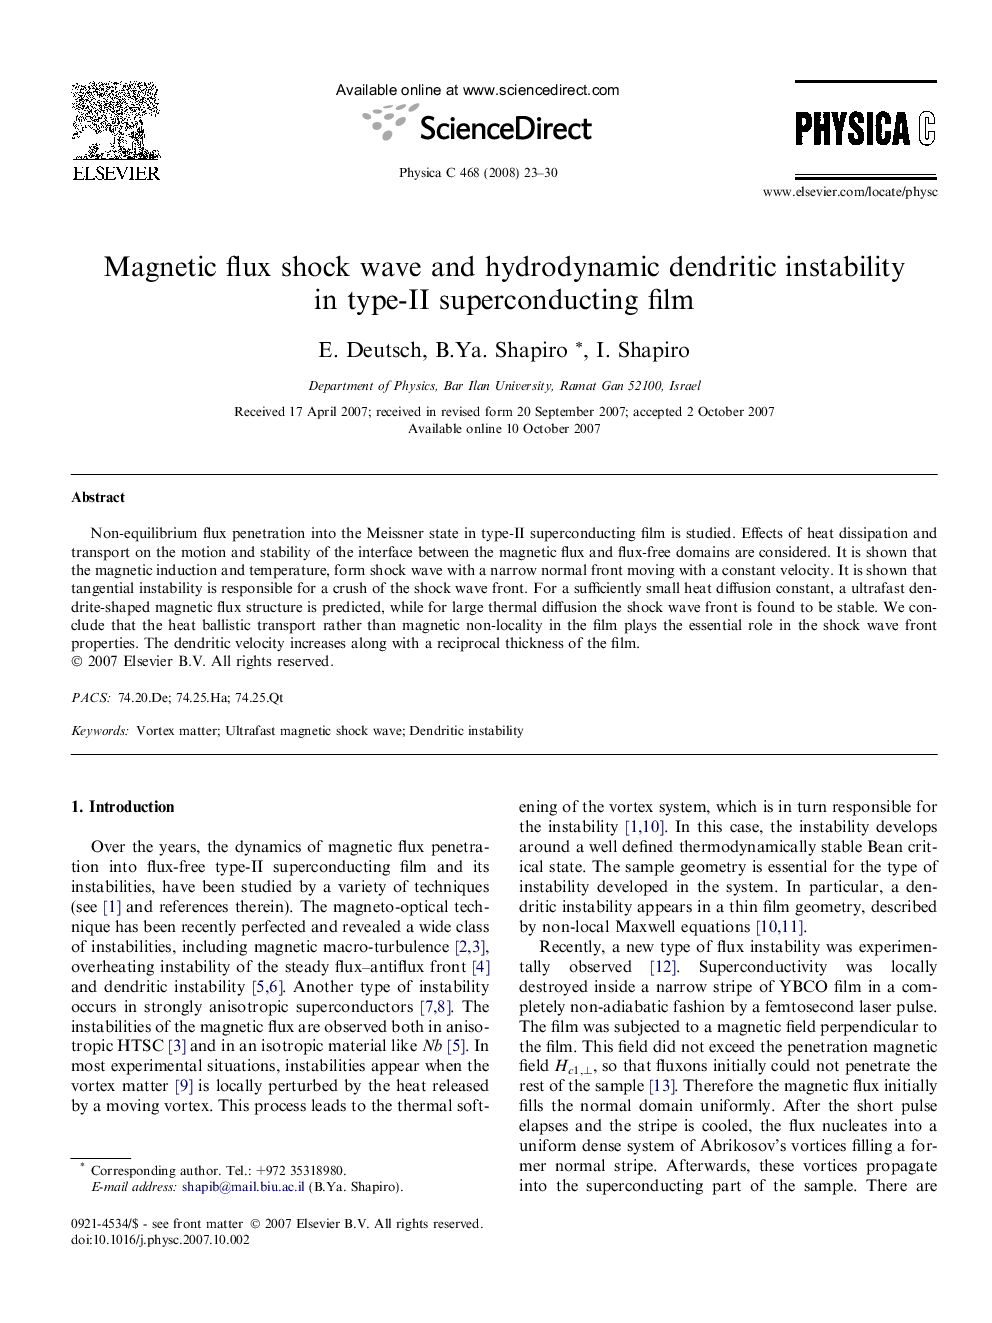 Magnetic flux shock wave and hydrodynamic dendritic instability in type-II superconducting film